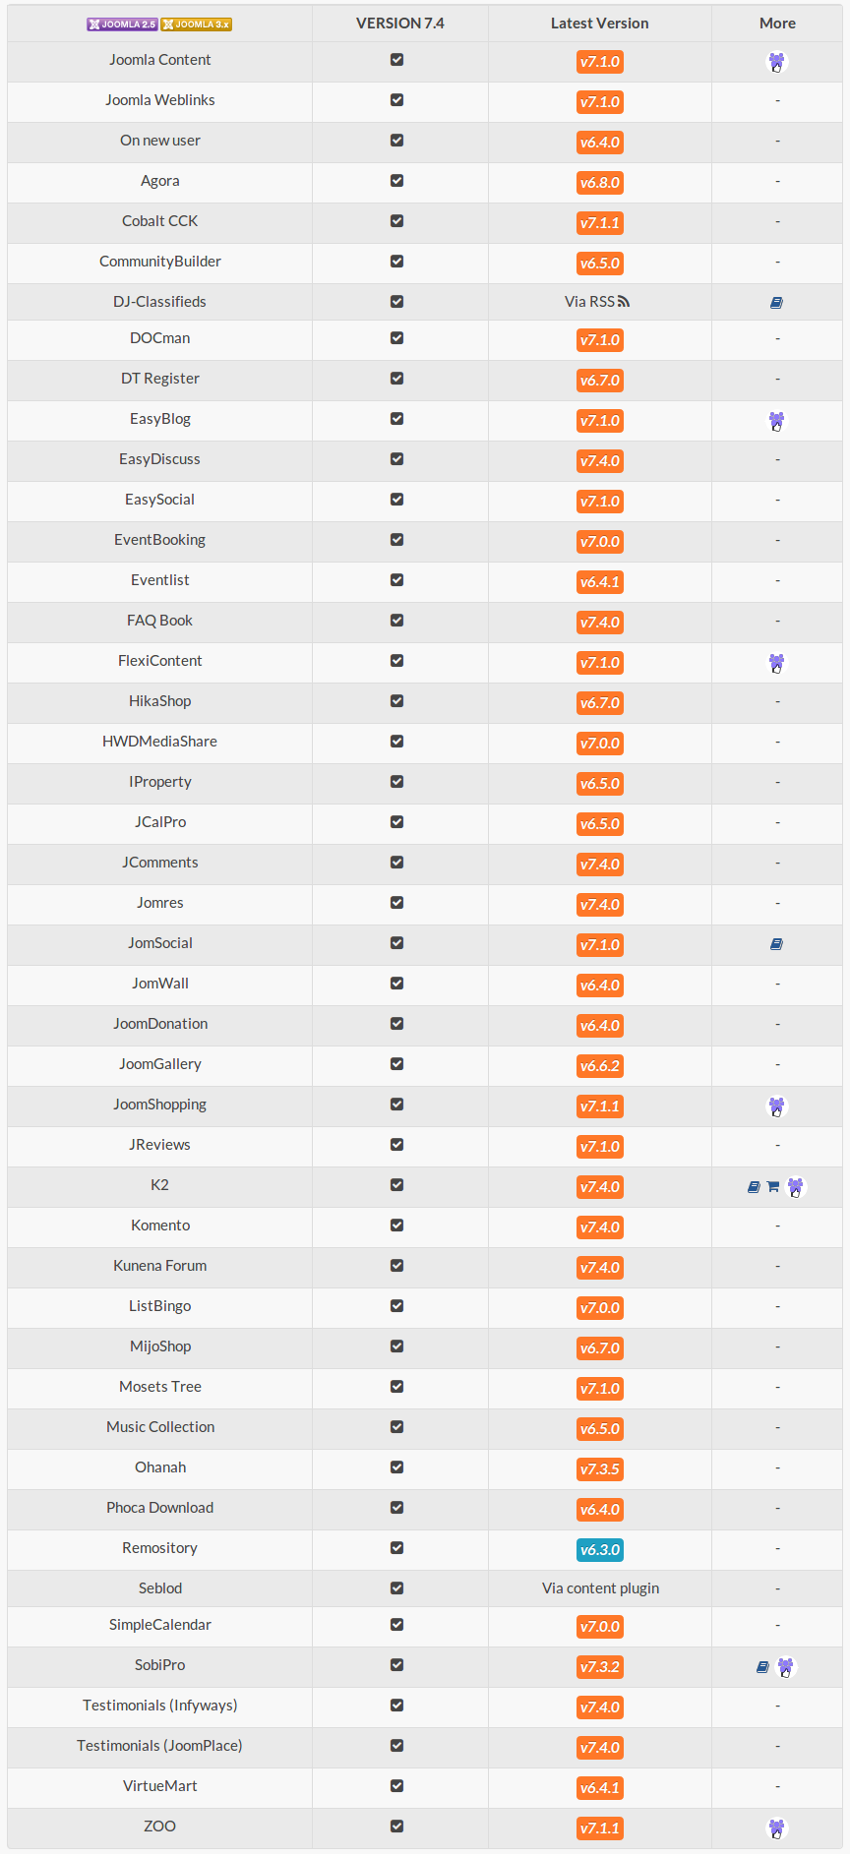 Updated Compatibility Chart for AutoTweetNG and Joocial v7.4